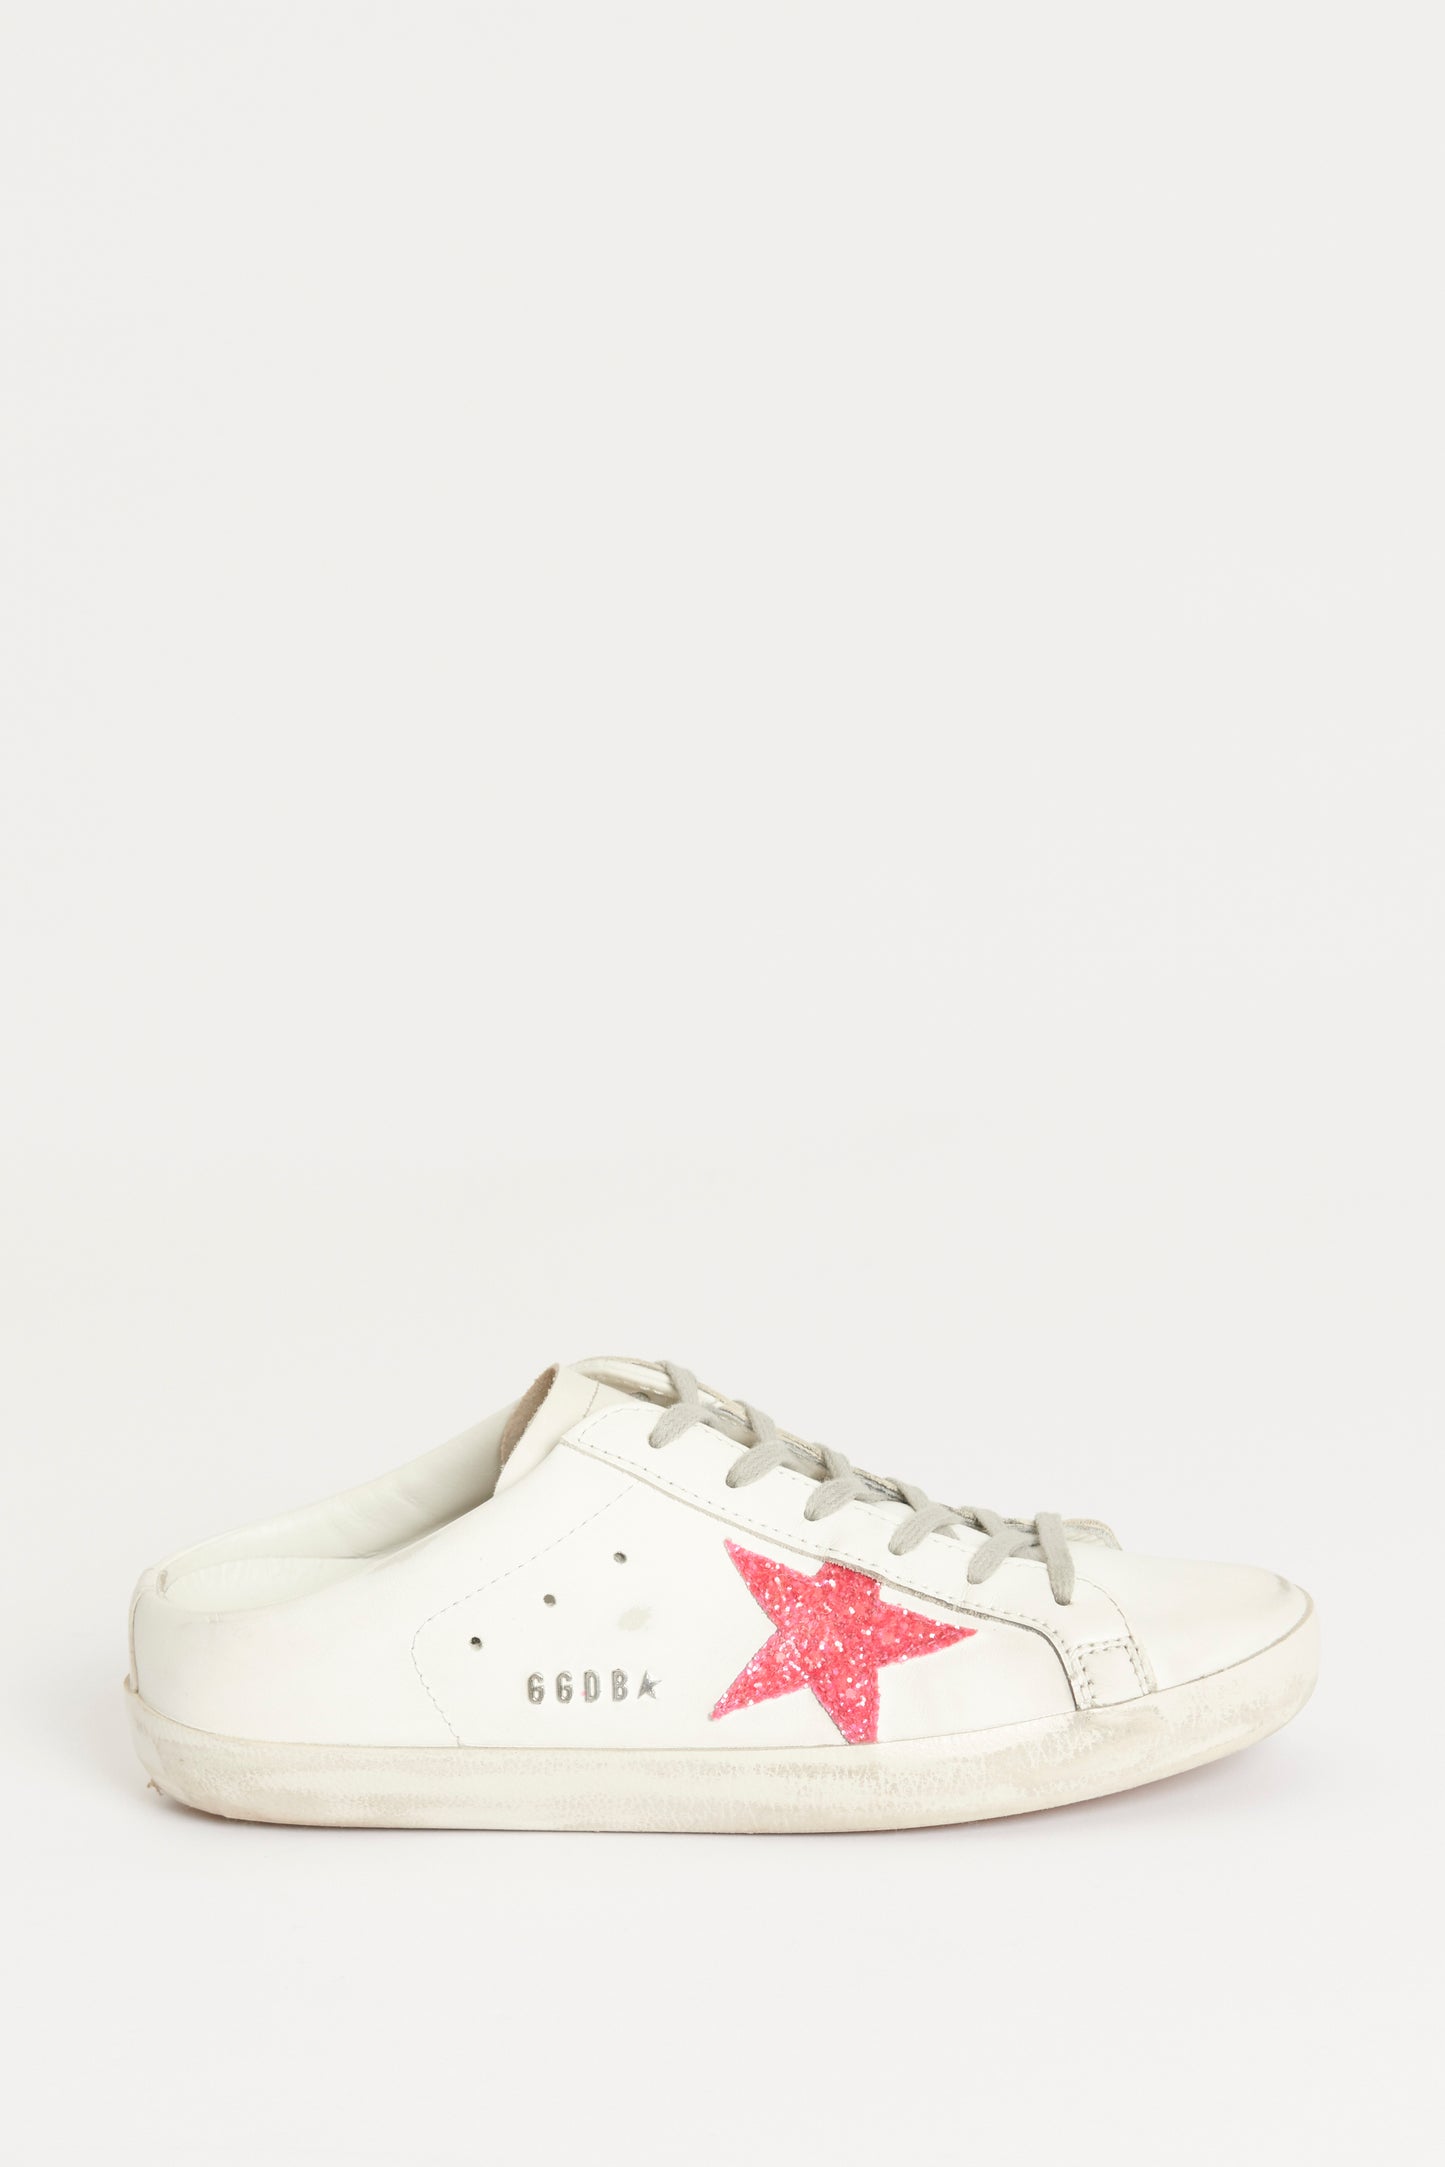 White Leather Preowned Superstar Sabot Trainers